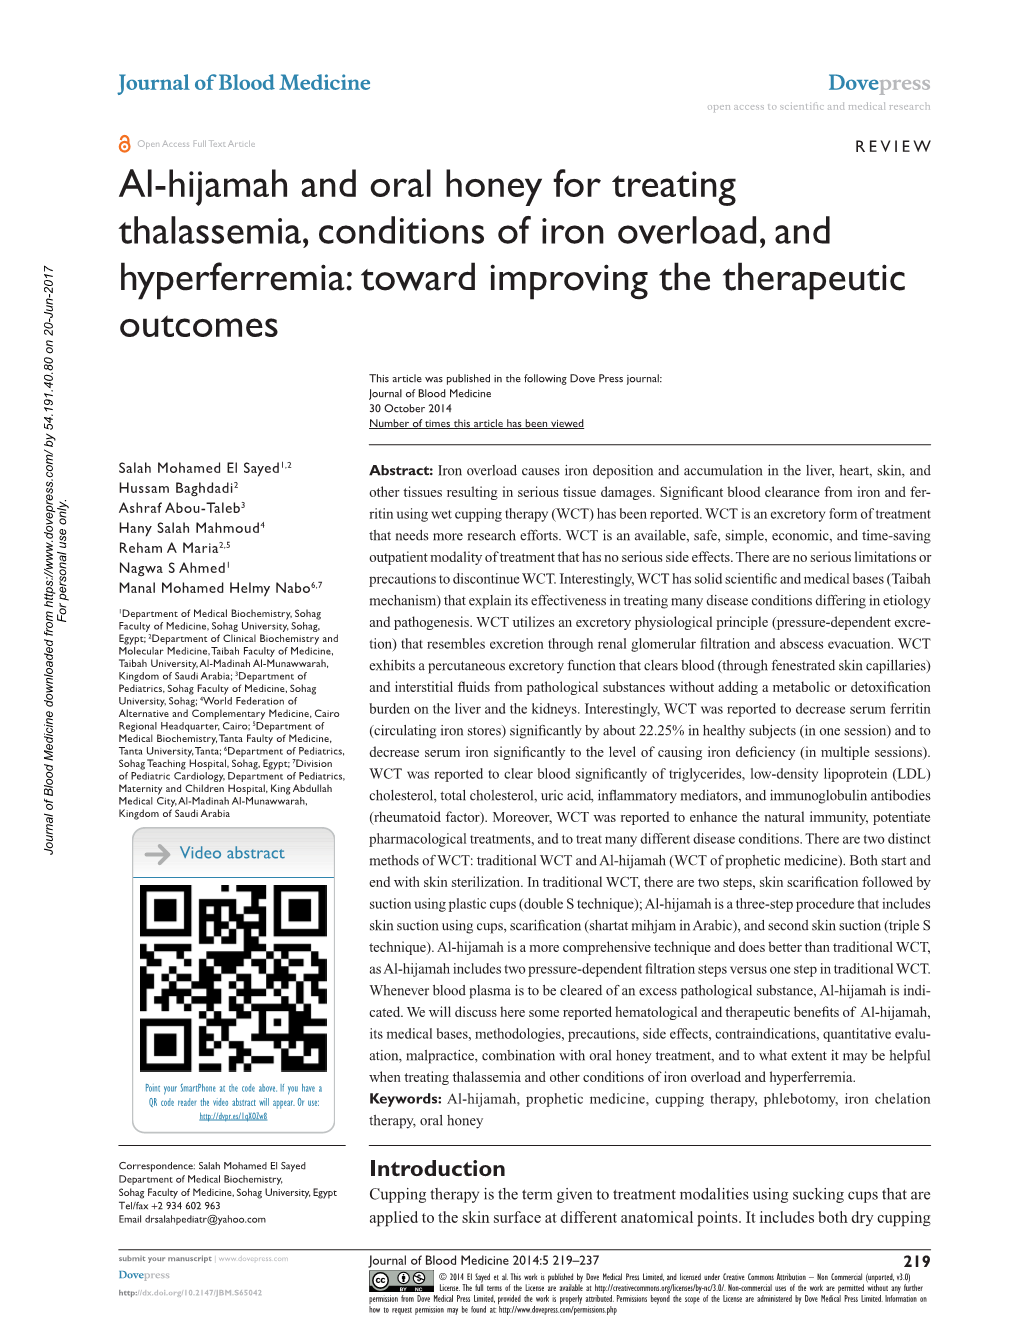 Al-Hijamah and Oral Honey for Treating Thalassemia, Conditions of Iron Overload, and Hyperferremia: Toward Improving the Therapeutic Outcomes